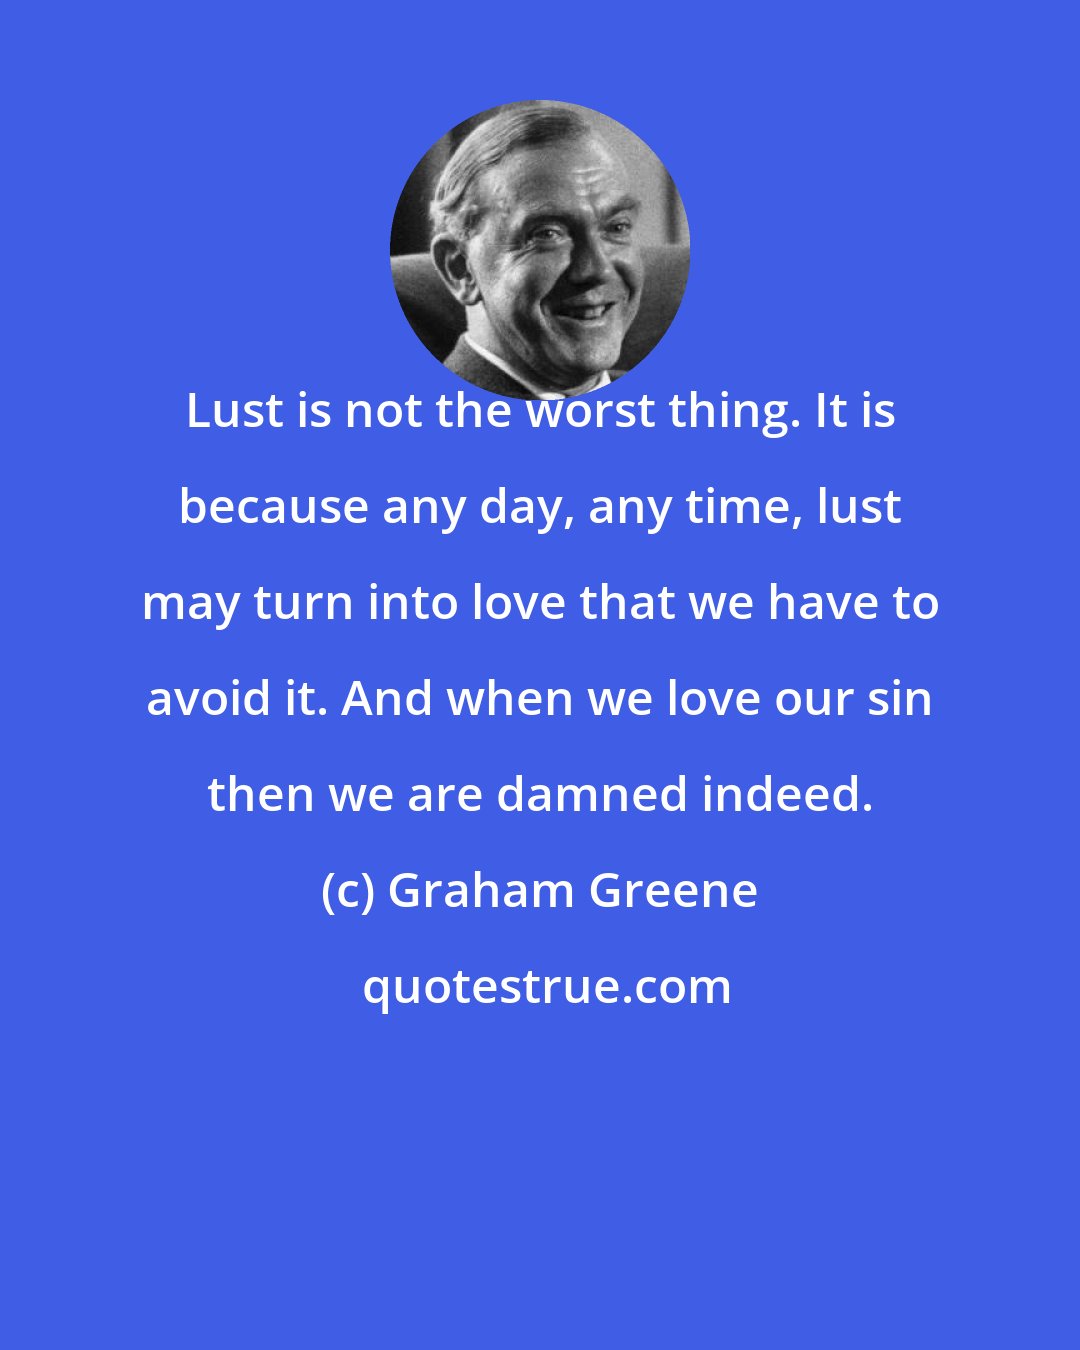 Graham Greene: Lust is not the worst thing. It is because any day, any time, lust may turn into love that we have to avoid it. And when we love our sin then we are damned indeed.